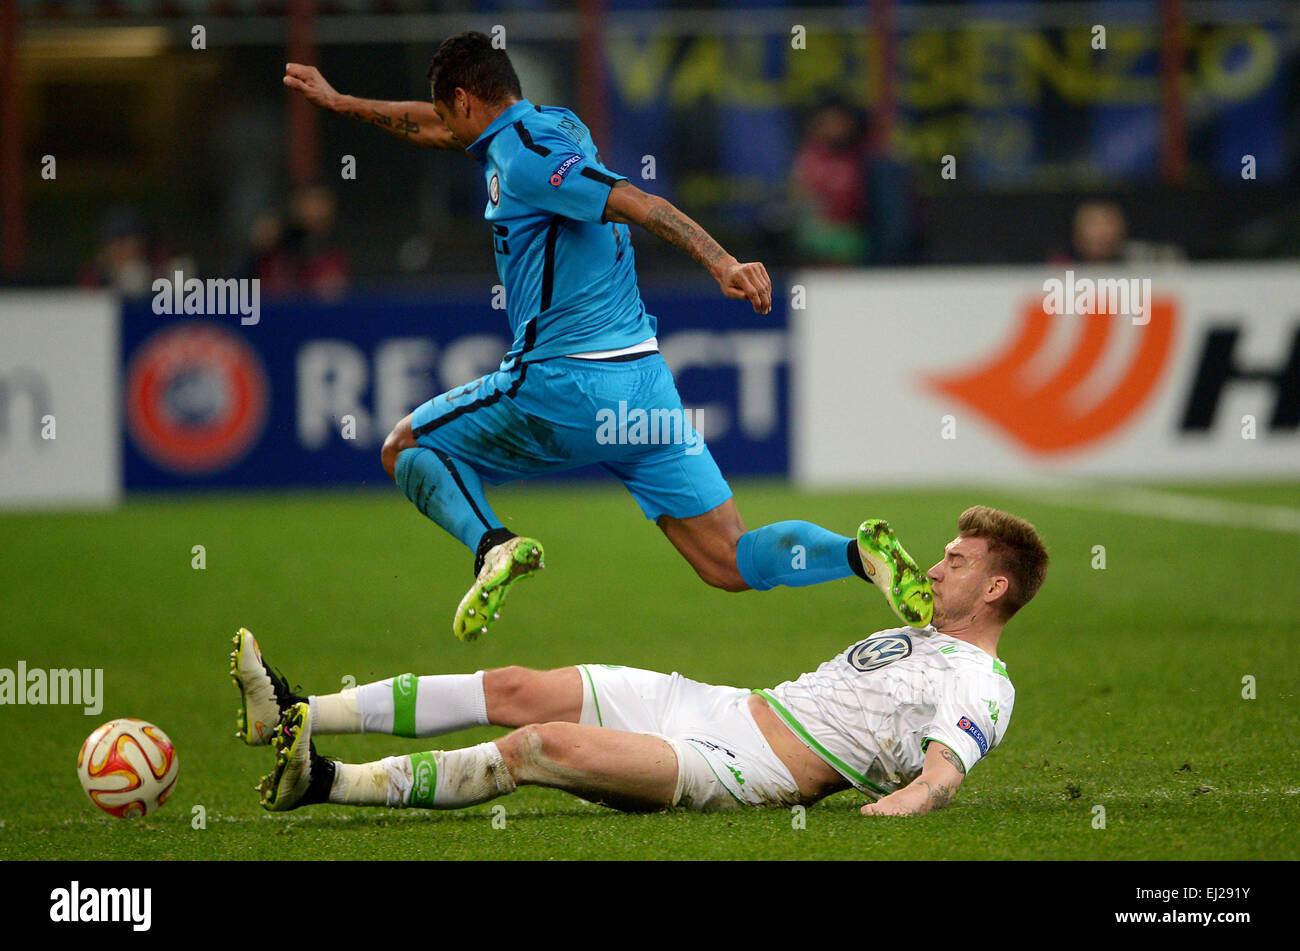 Milan, Italy. 19th Mar, 2015. Wolfsburg's Nicklas Bendtner (R) and Inter's Fredy Guarin vie for the ball during the UEFA Europa League round of 16 second leg soccer match between Inter Milan and VfL Wolfsburg at Giuseppe Meazza stadium in Milan, Italy, 19 March 2015. Photo: Peter Steffen/dpa/Alamy Live News Stock Photo